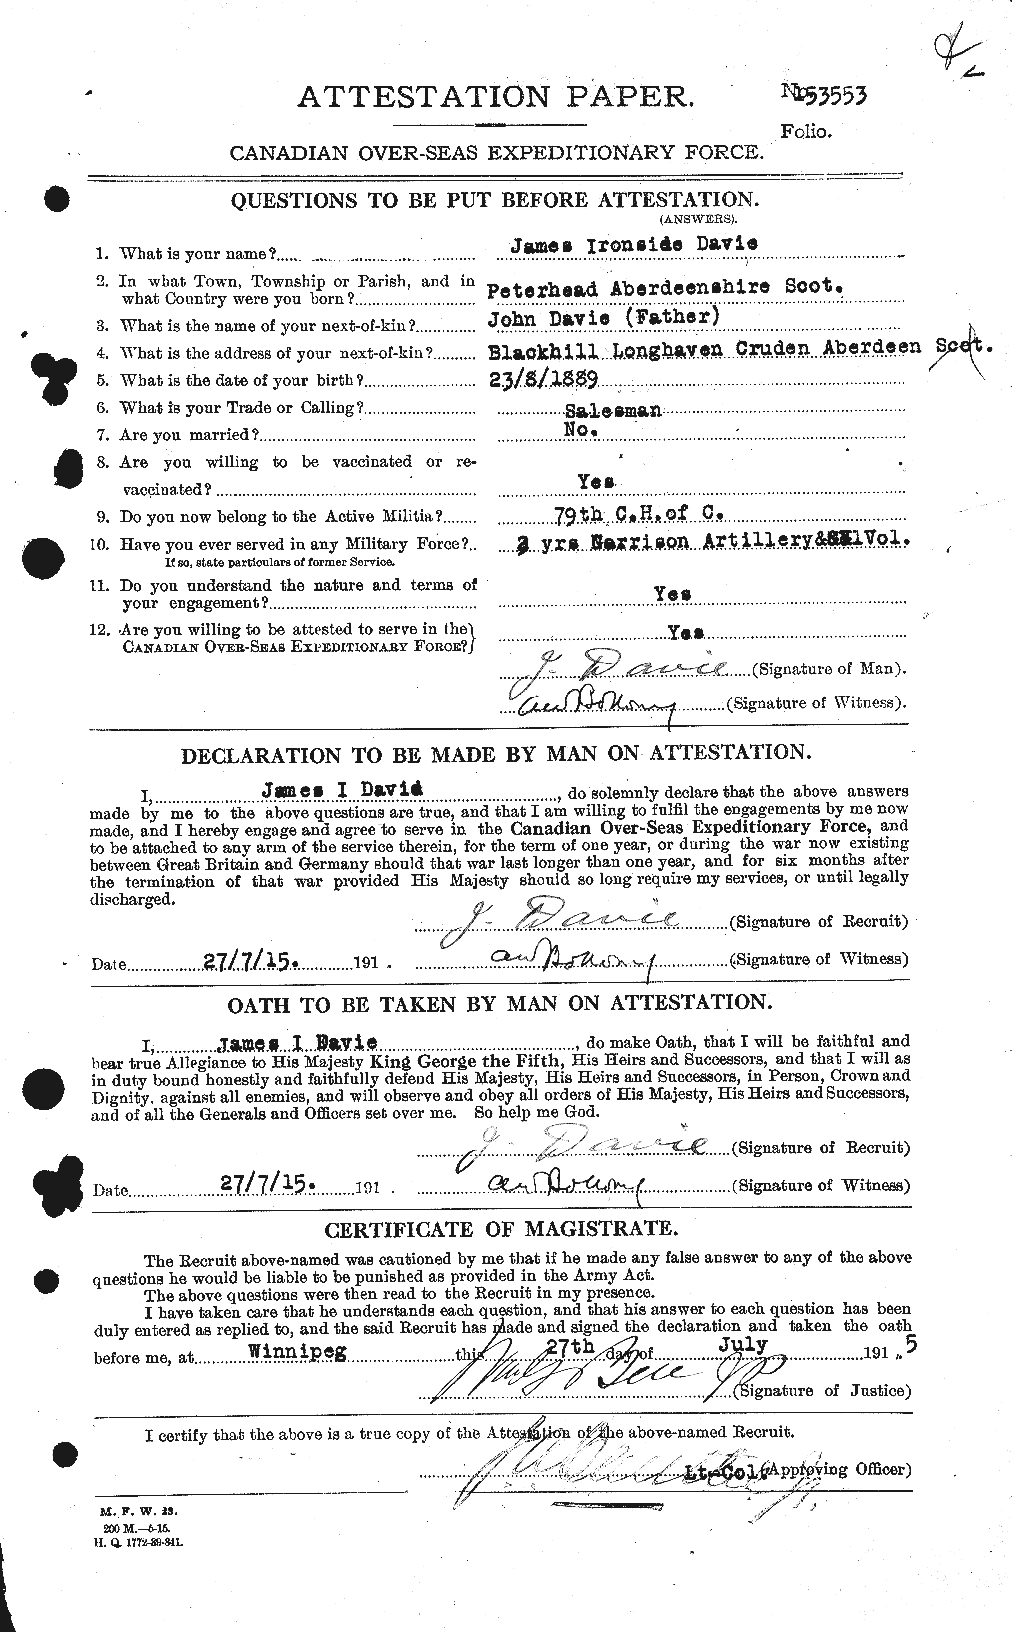 Personnel Records of the First World War - CEF 278834a